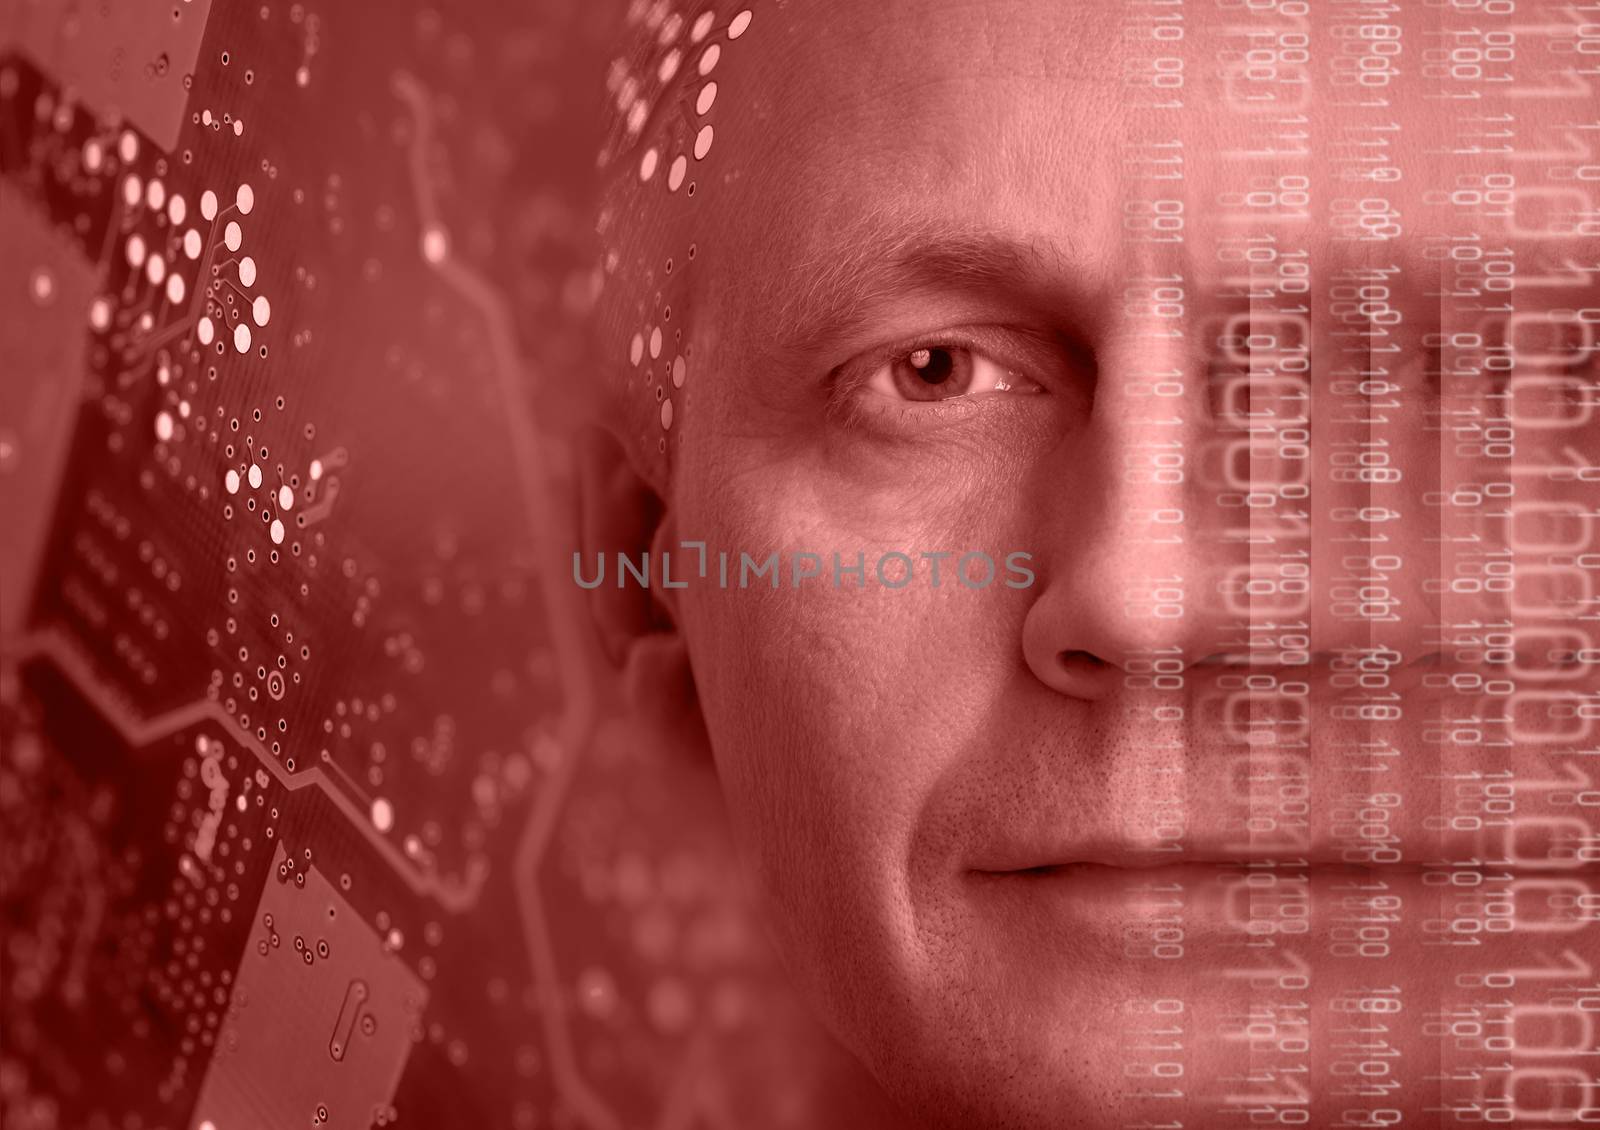 Man portrait on background of electronic circuit board and binary code.